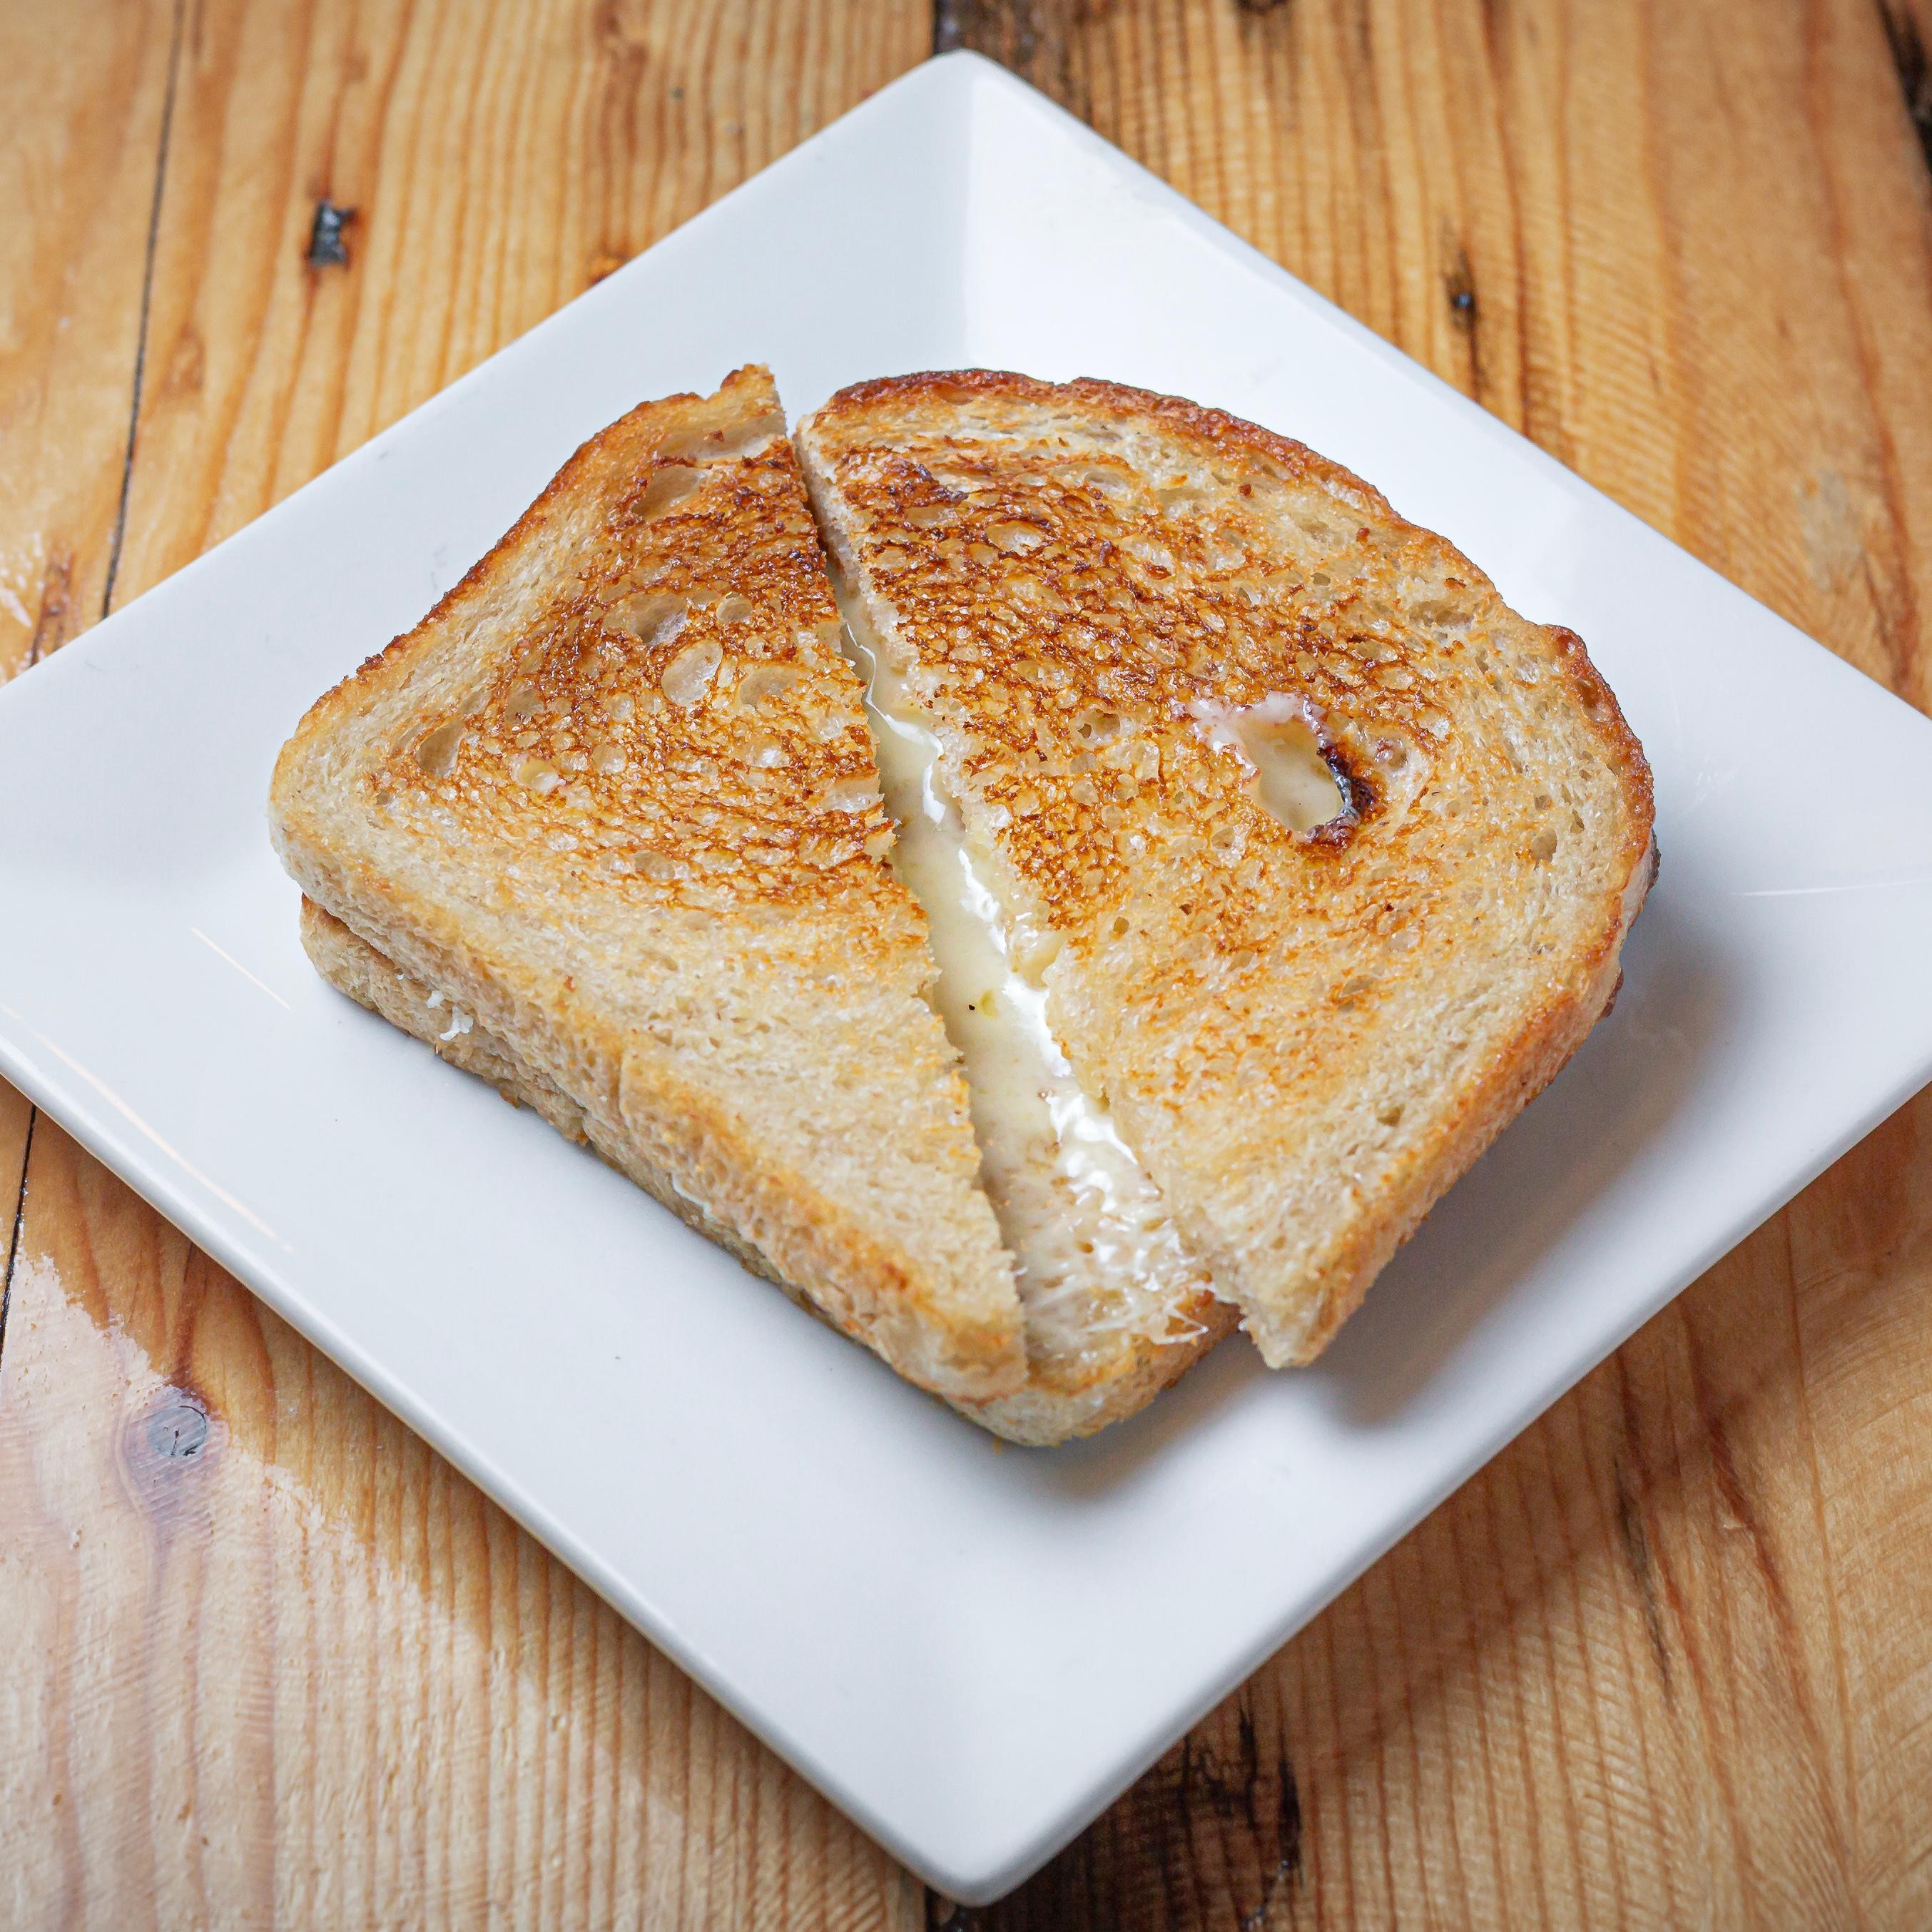 #1 Classic Grilled Cheese